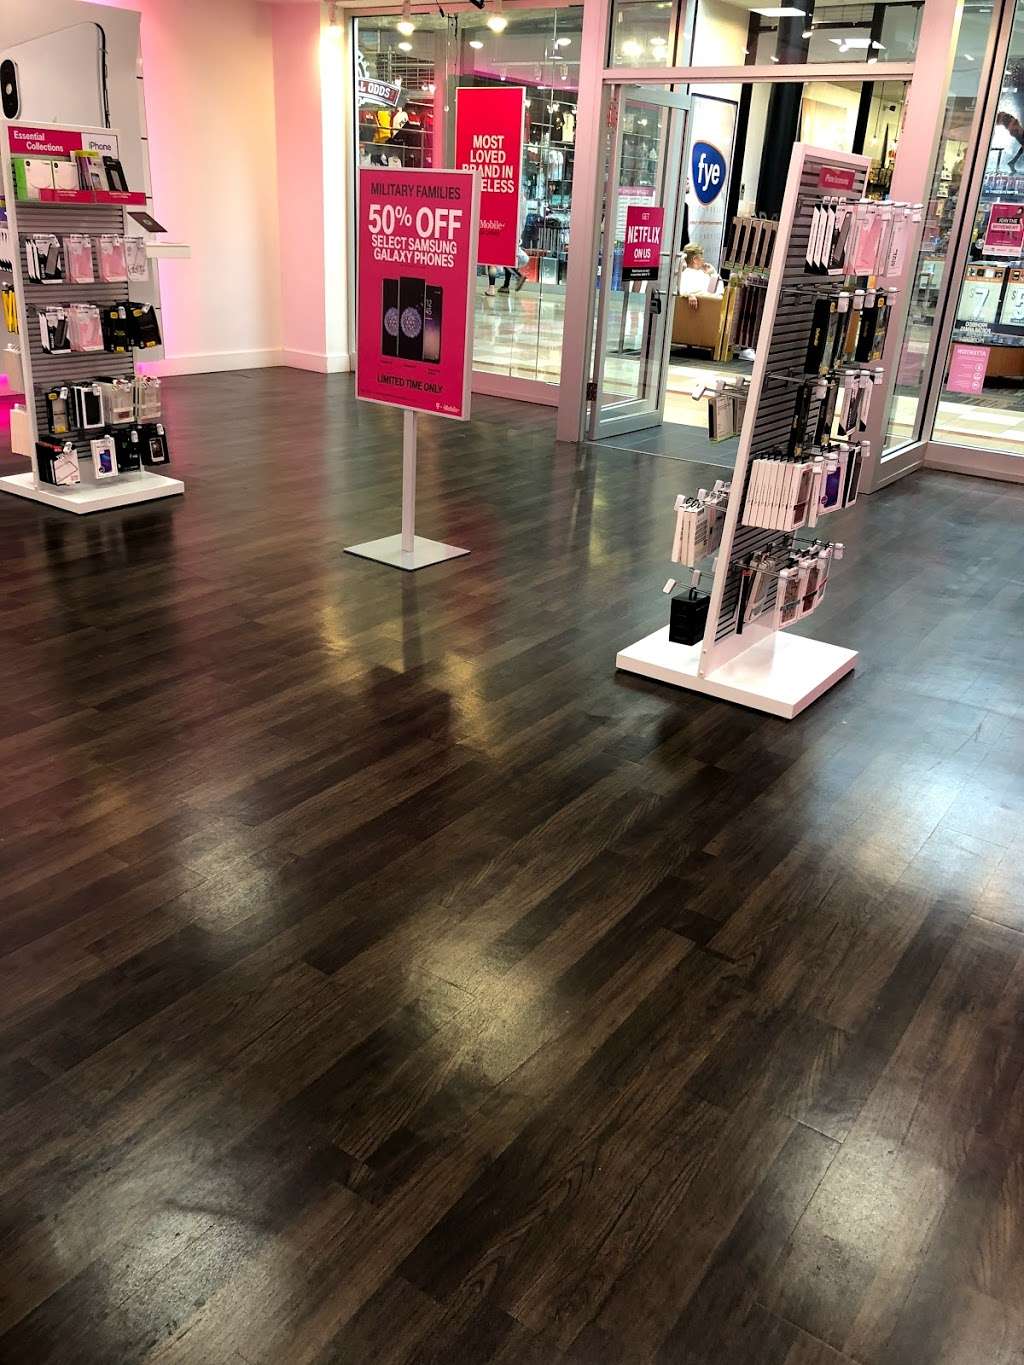 T-Mobile - electronics store  | Photo 1 of 3 | Address: 1201 Hooper Ave, Toms River, NJ 08753, USA | Phone: (732) 557-0090